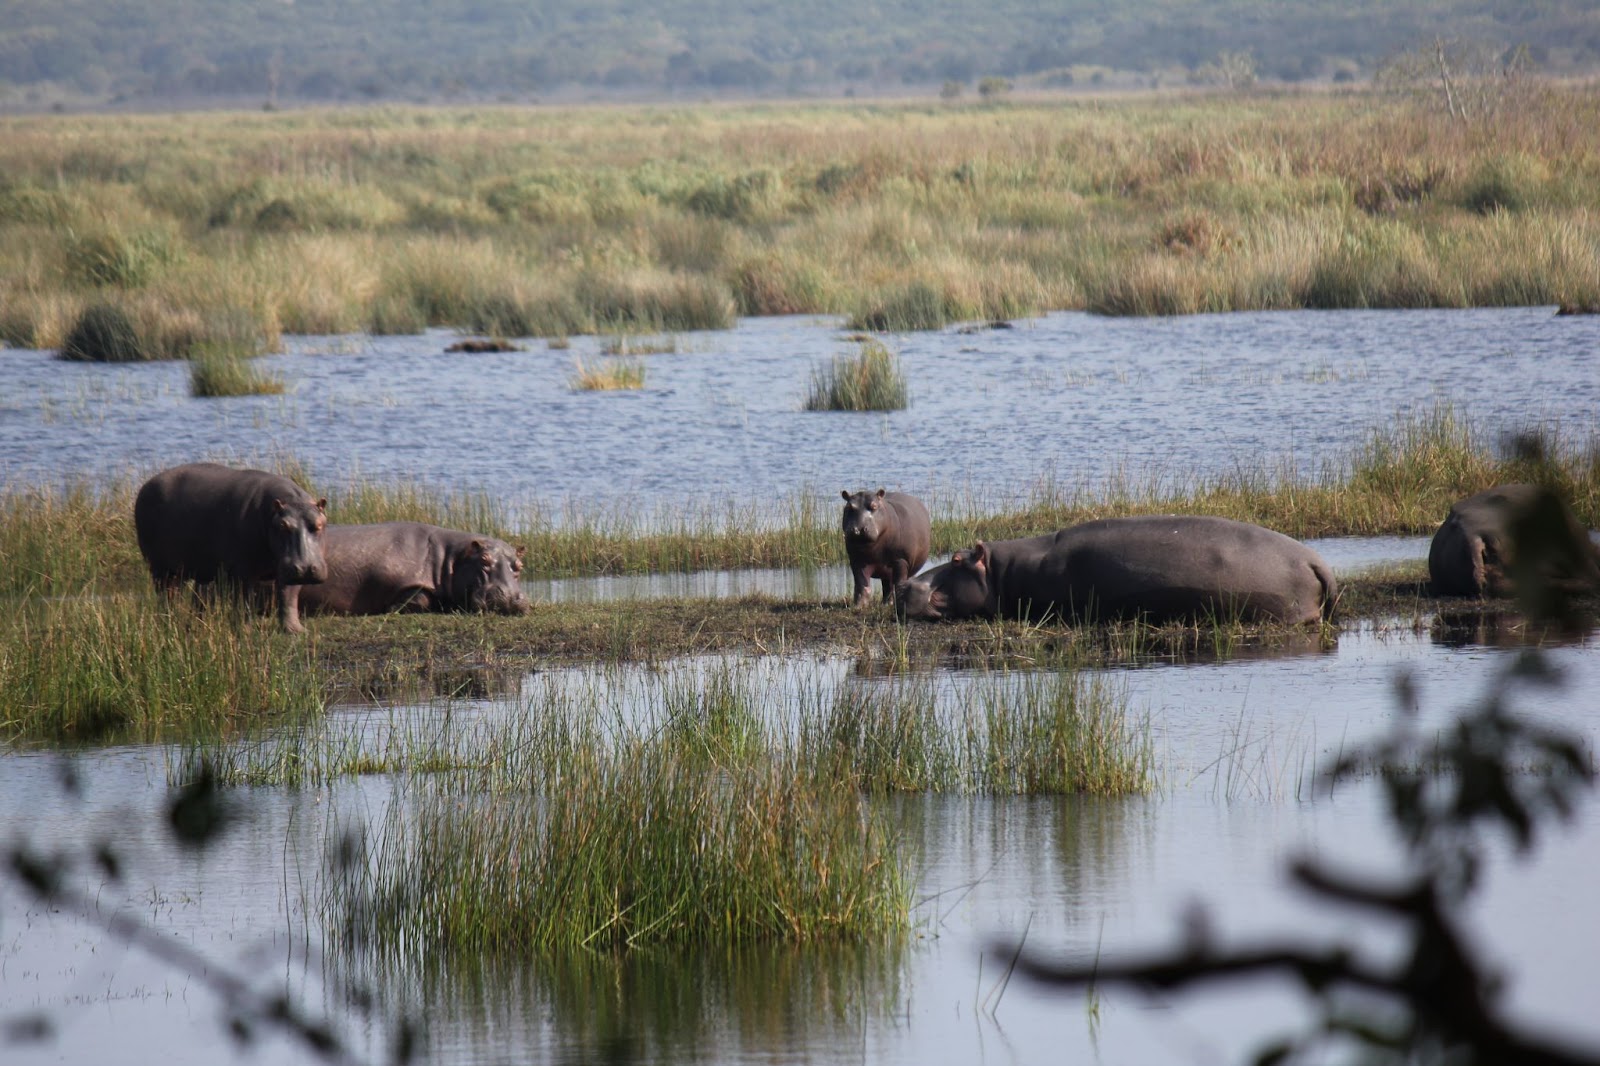 A herd of hippos native to the iSimangaliso Wetland Park